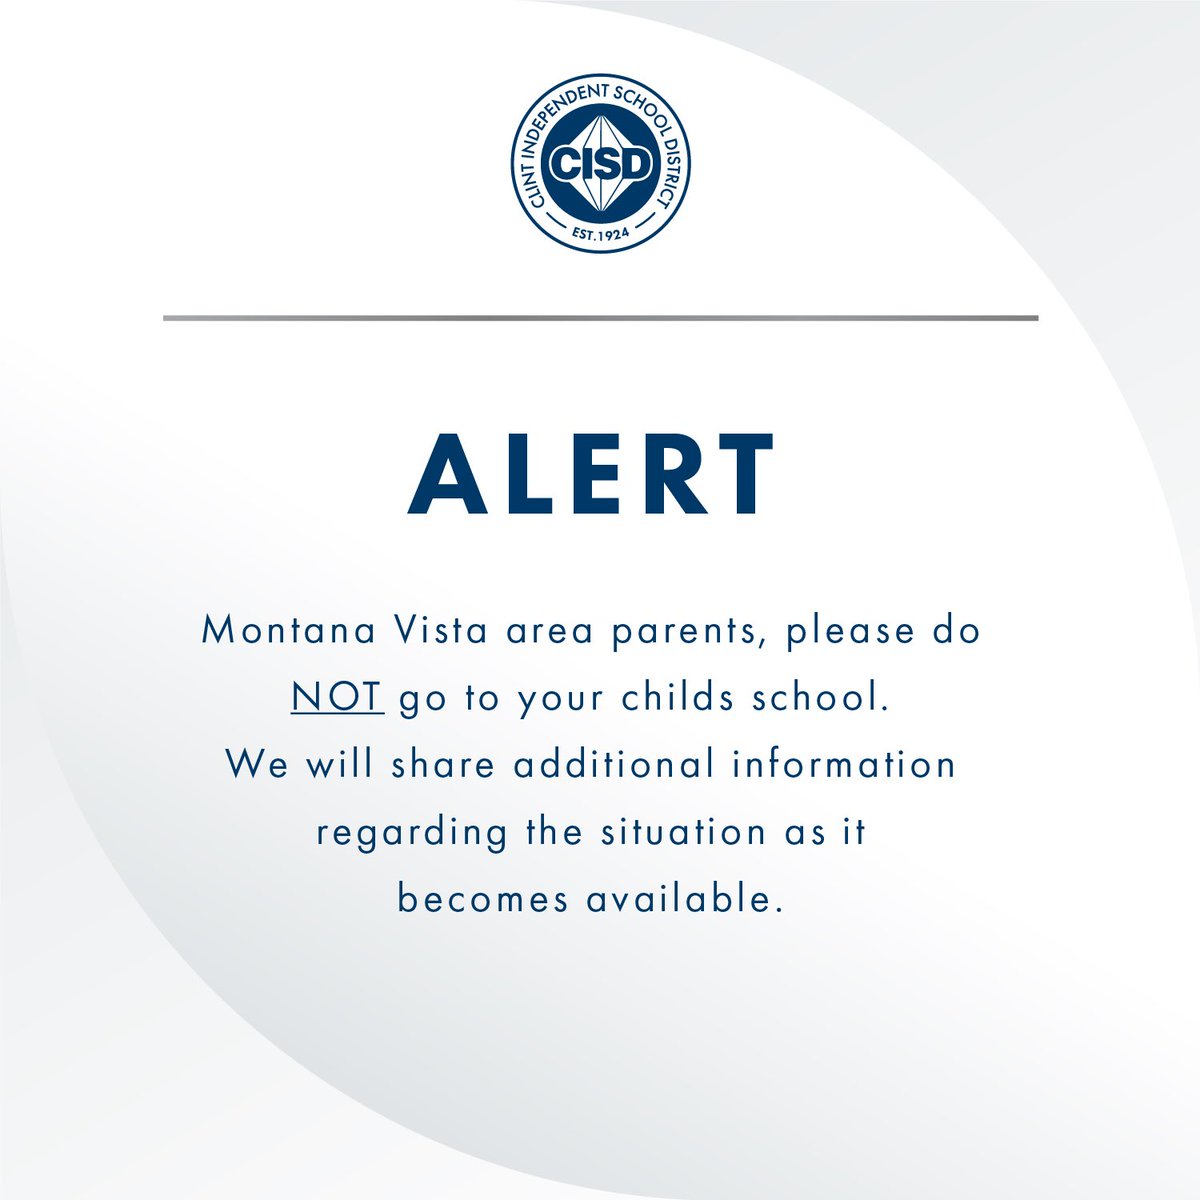 ALERT: Montana Vista area parents, please do NOT go to your childs school. We will share additional information regarding the situation as it becomes available.